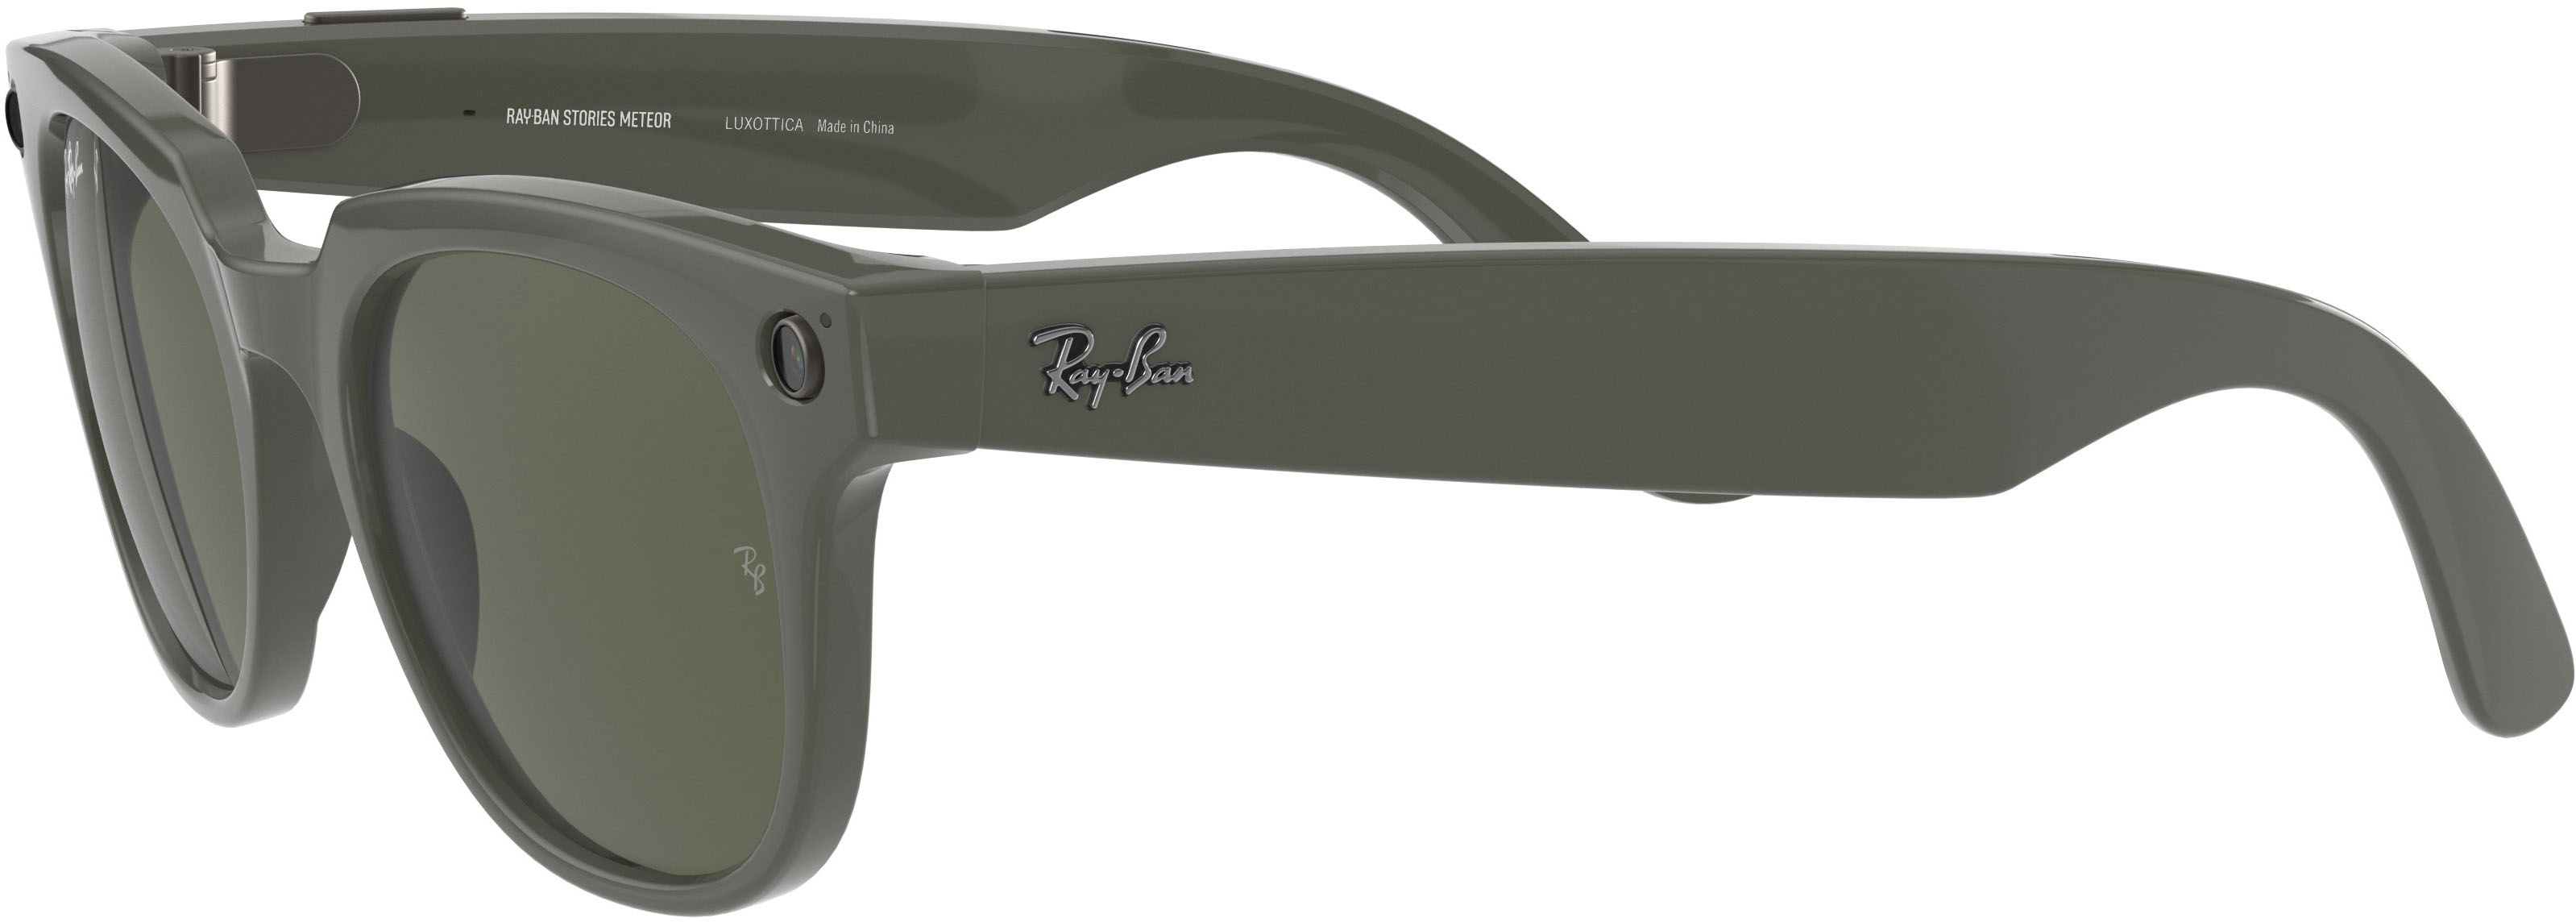 Left View: Ray-Ban - Stories Meteor Smart Glasses - Shiny Olive/Transitions G-15  Green